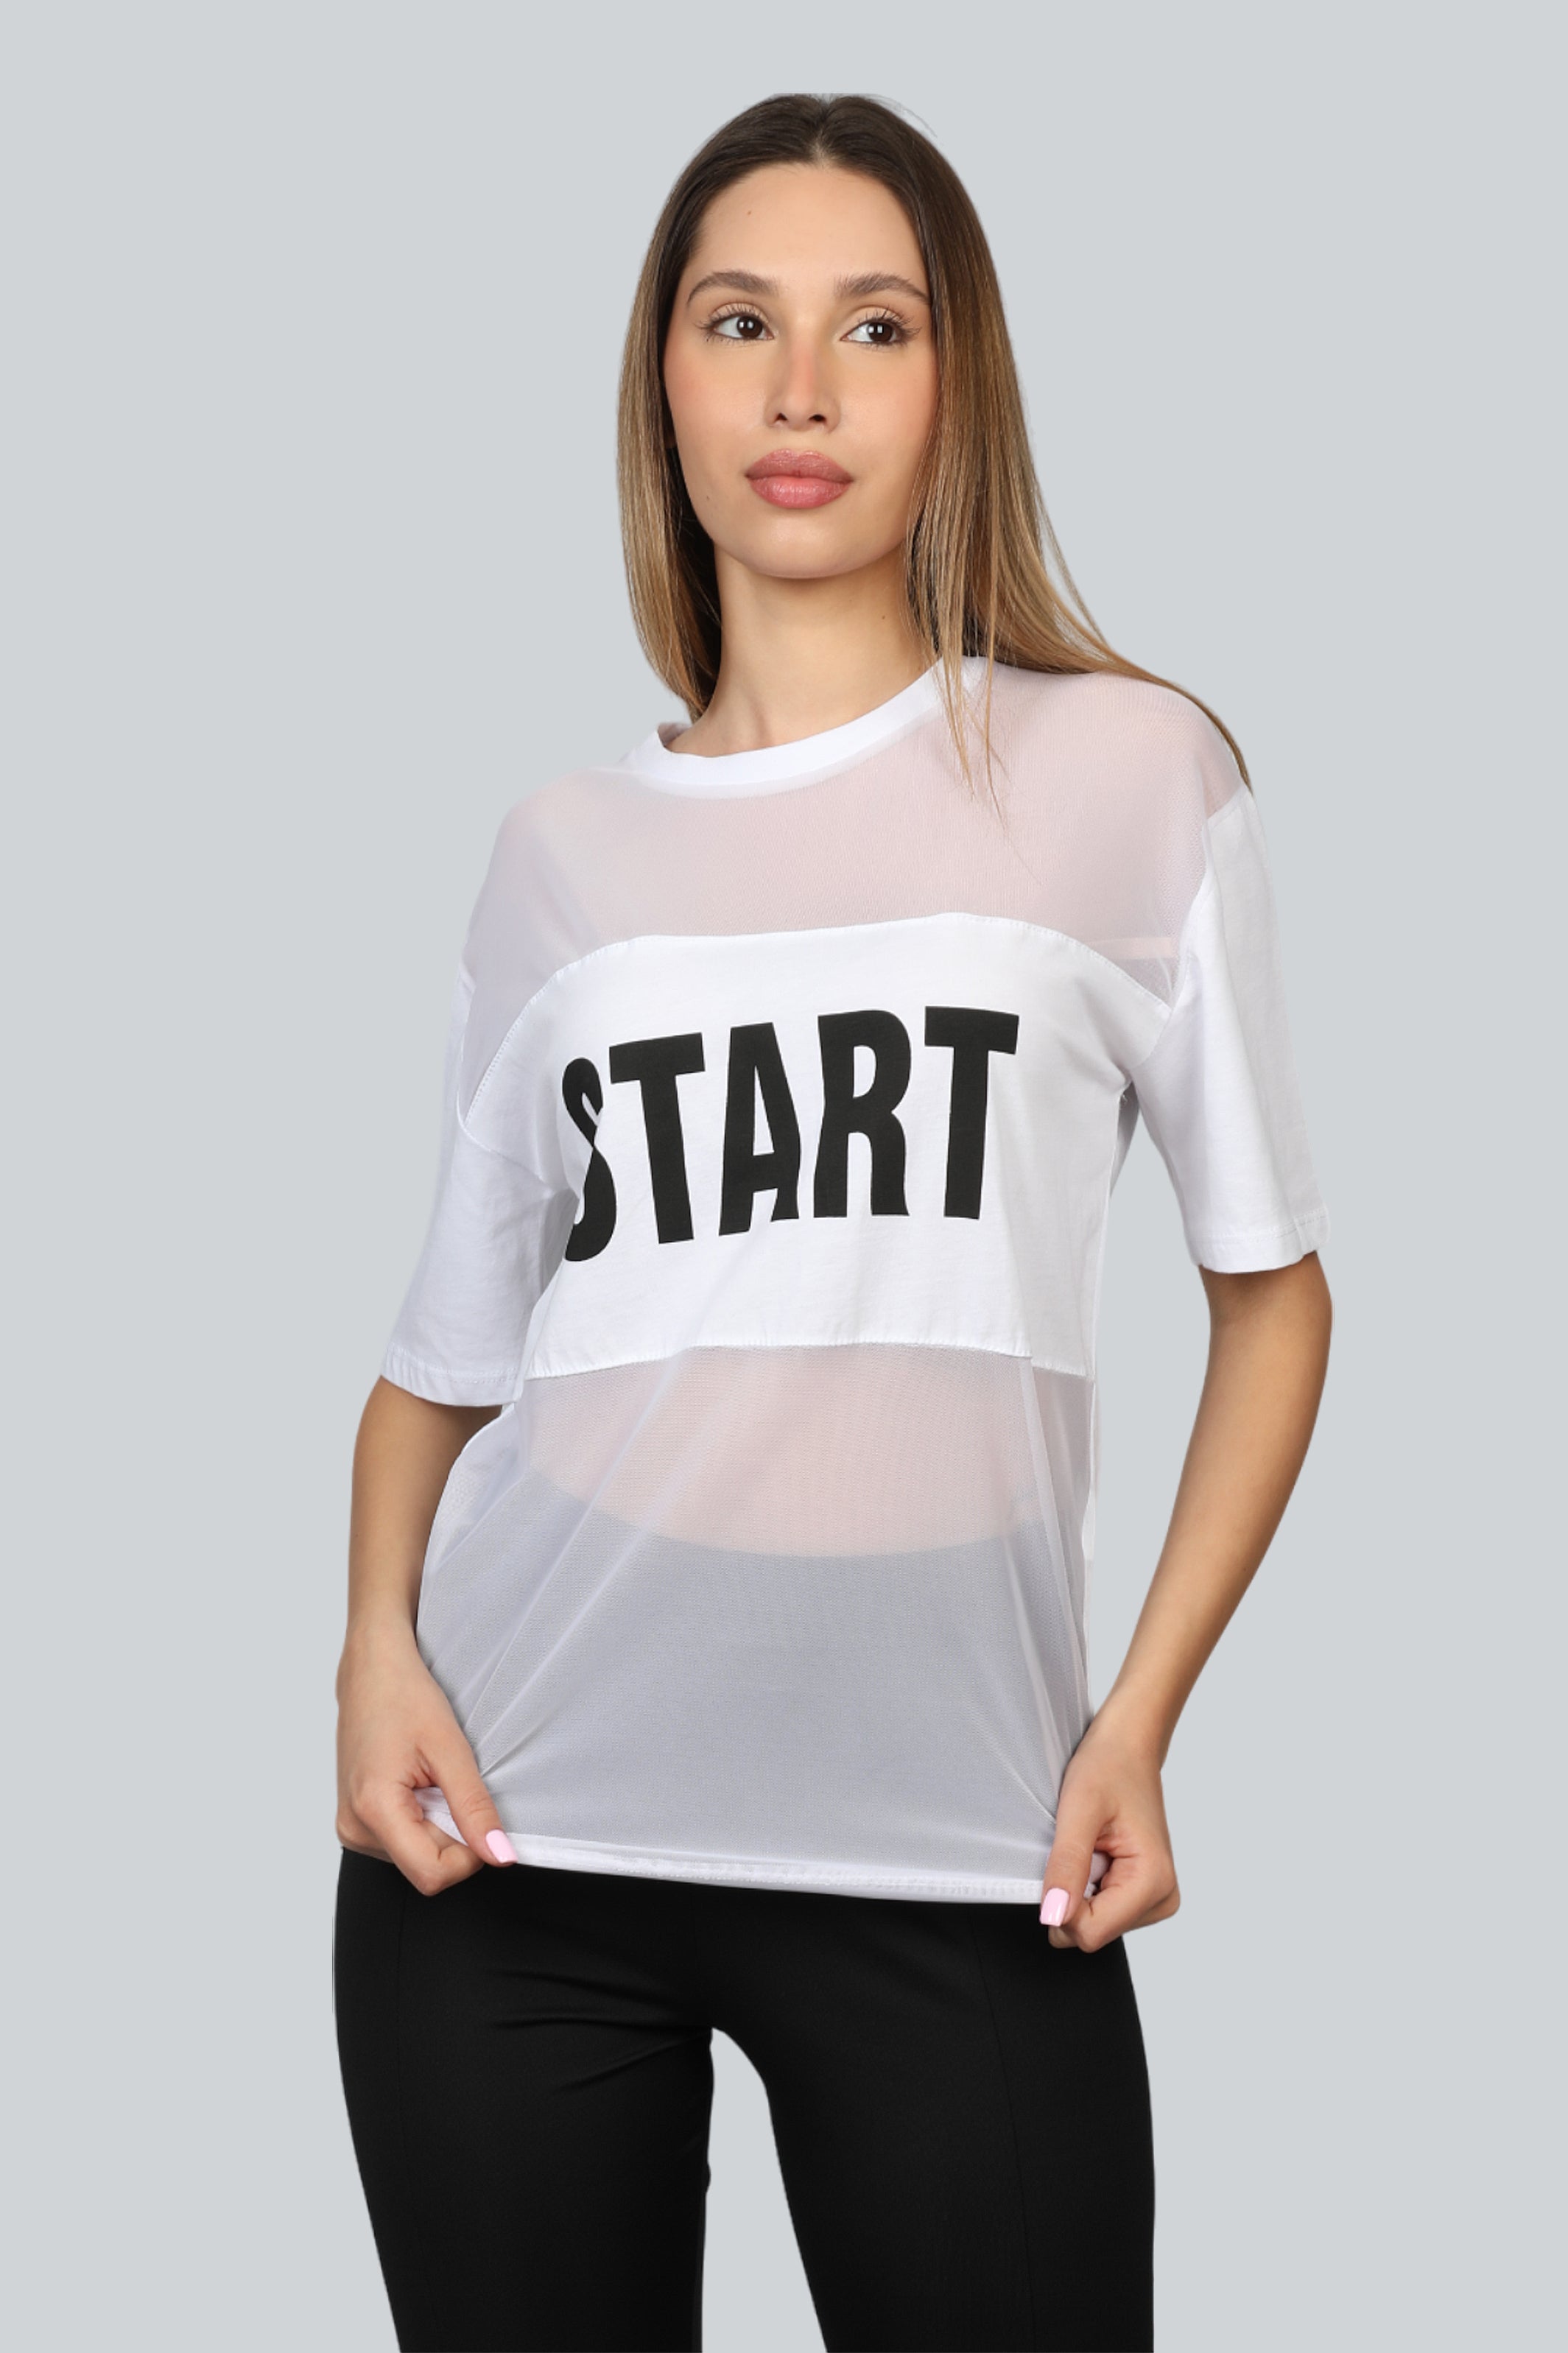 Women White T-shirt See Throw With "Start" Front Logo